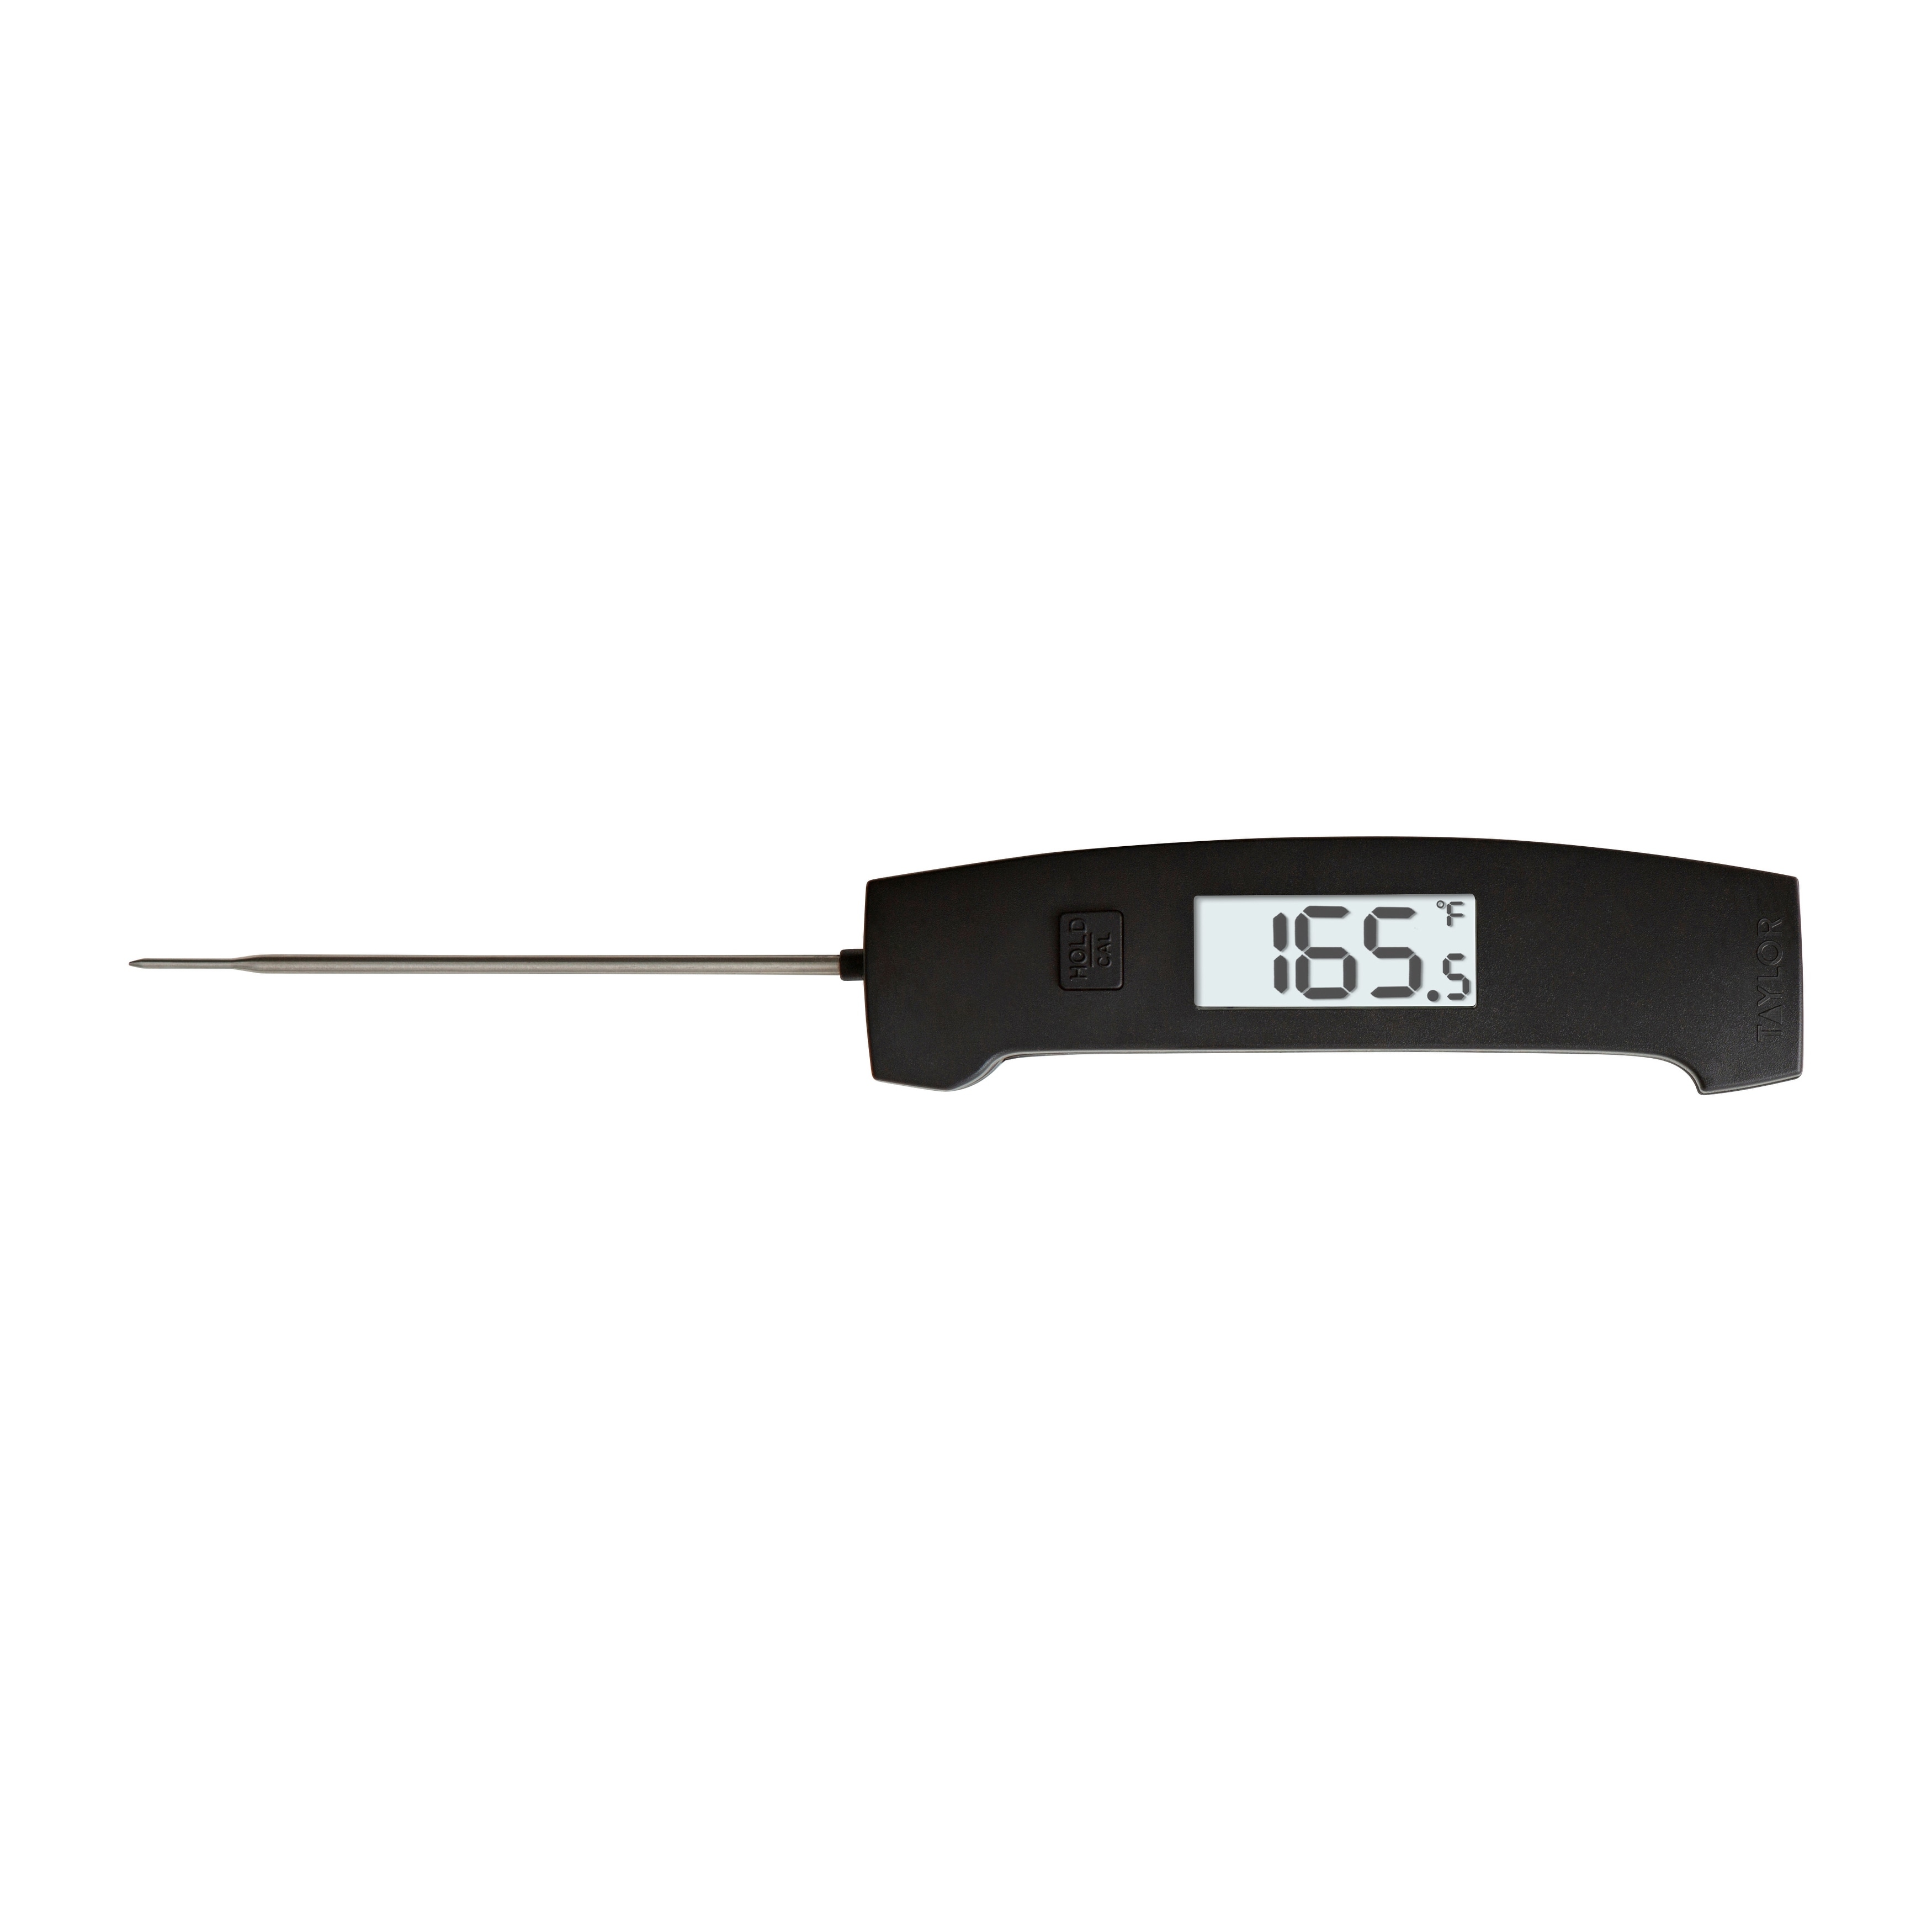 https://ak1.ostkcdn.com/images/products/is/images/direct/95f23ed618800181b09f88e820bfa08d41fcfe0c/Taylor-Ultra-Fast-Thermocouple-Thermometer.jpg